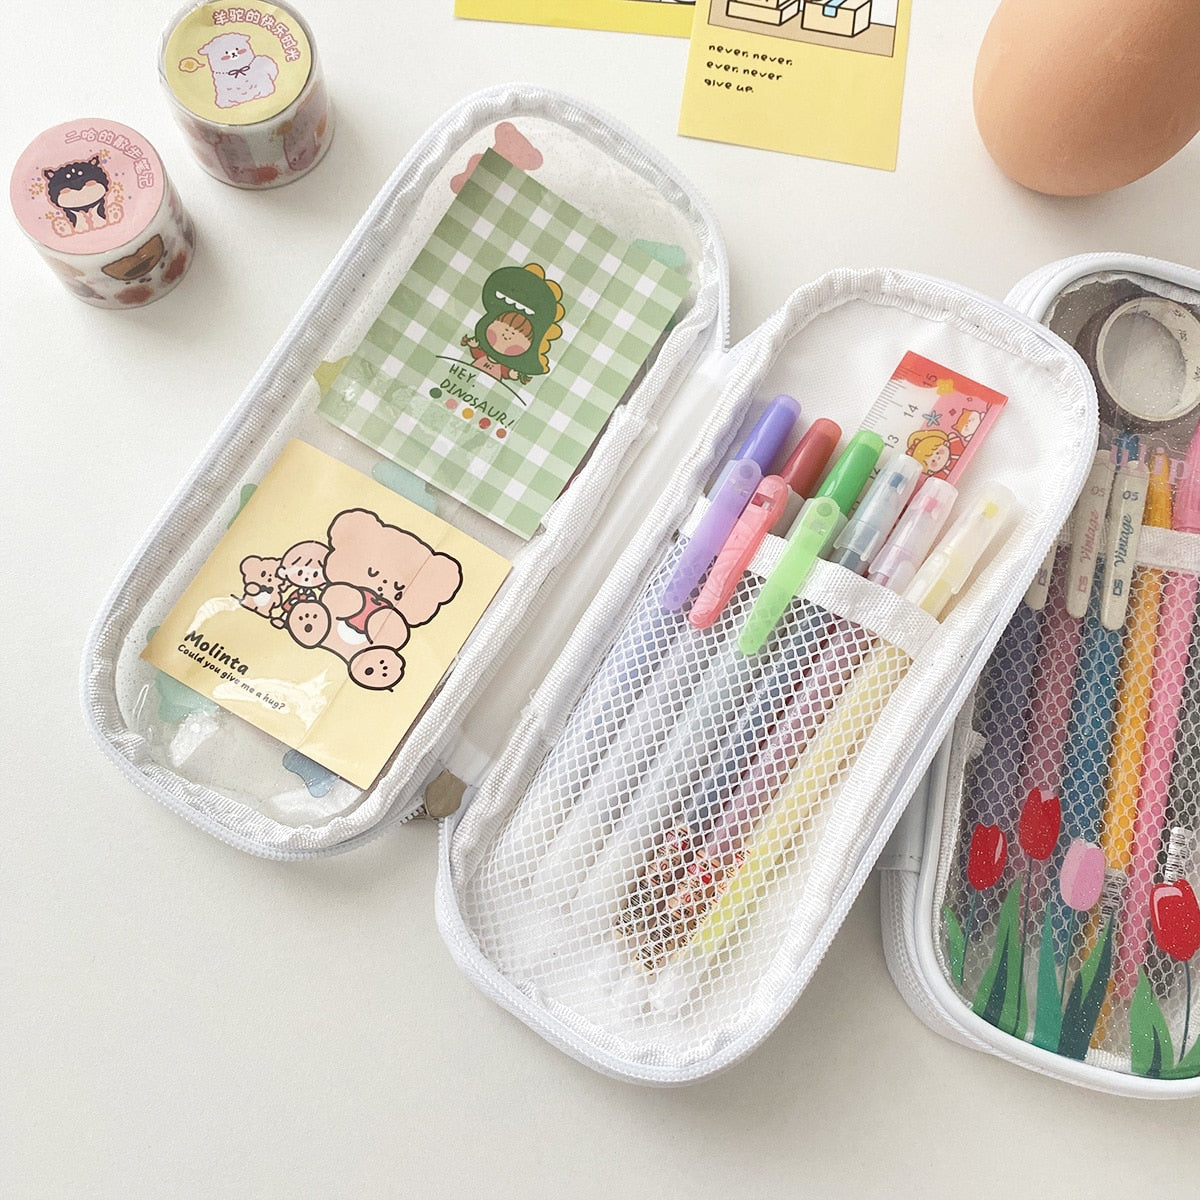 Why you Should Buy a Pencil Case for you